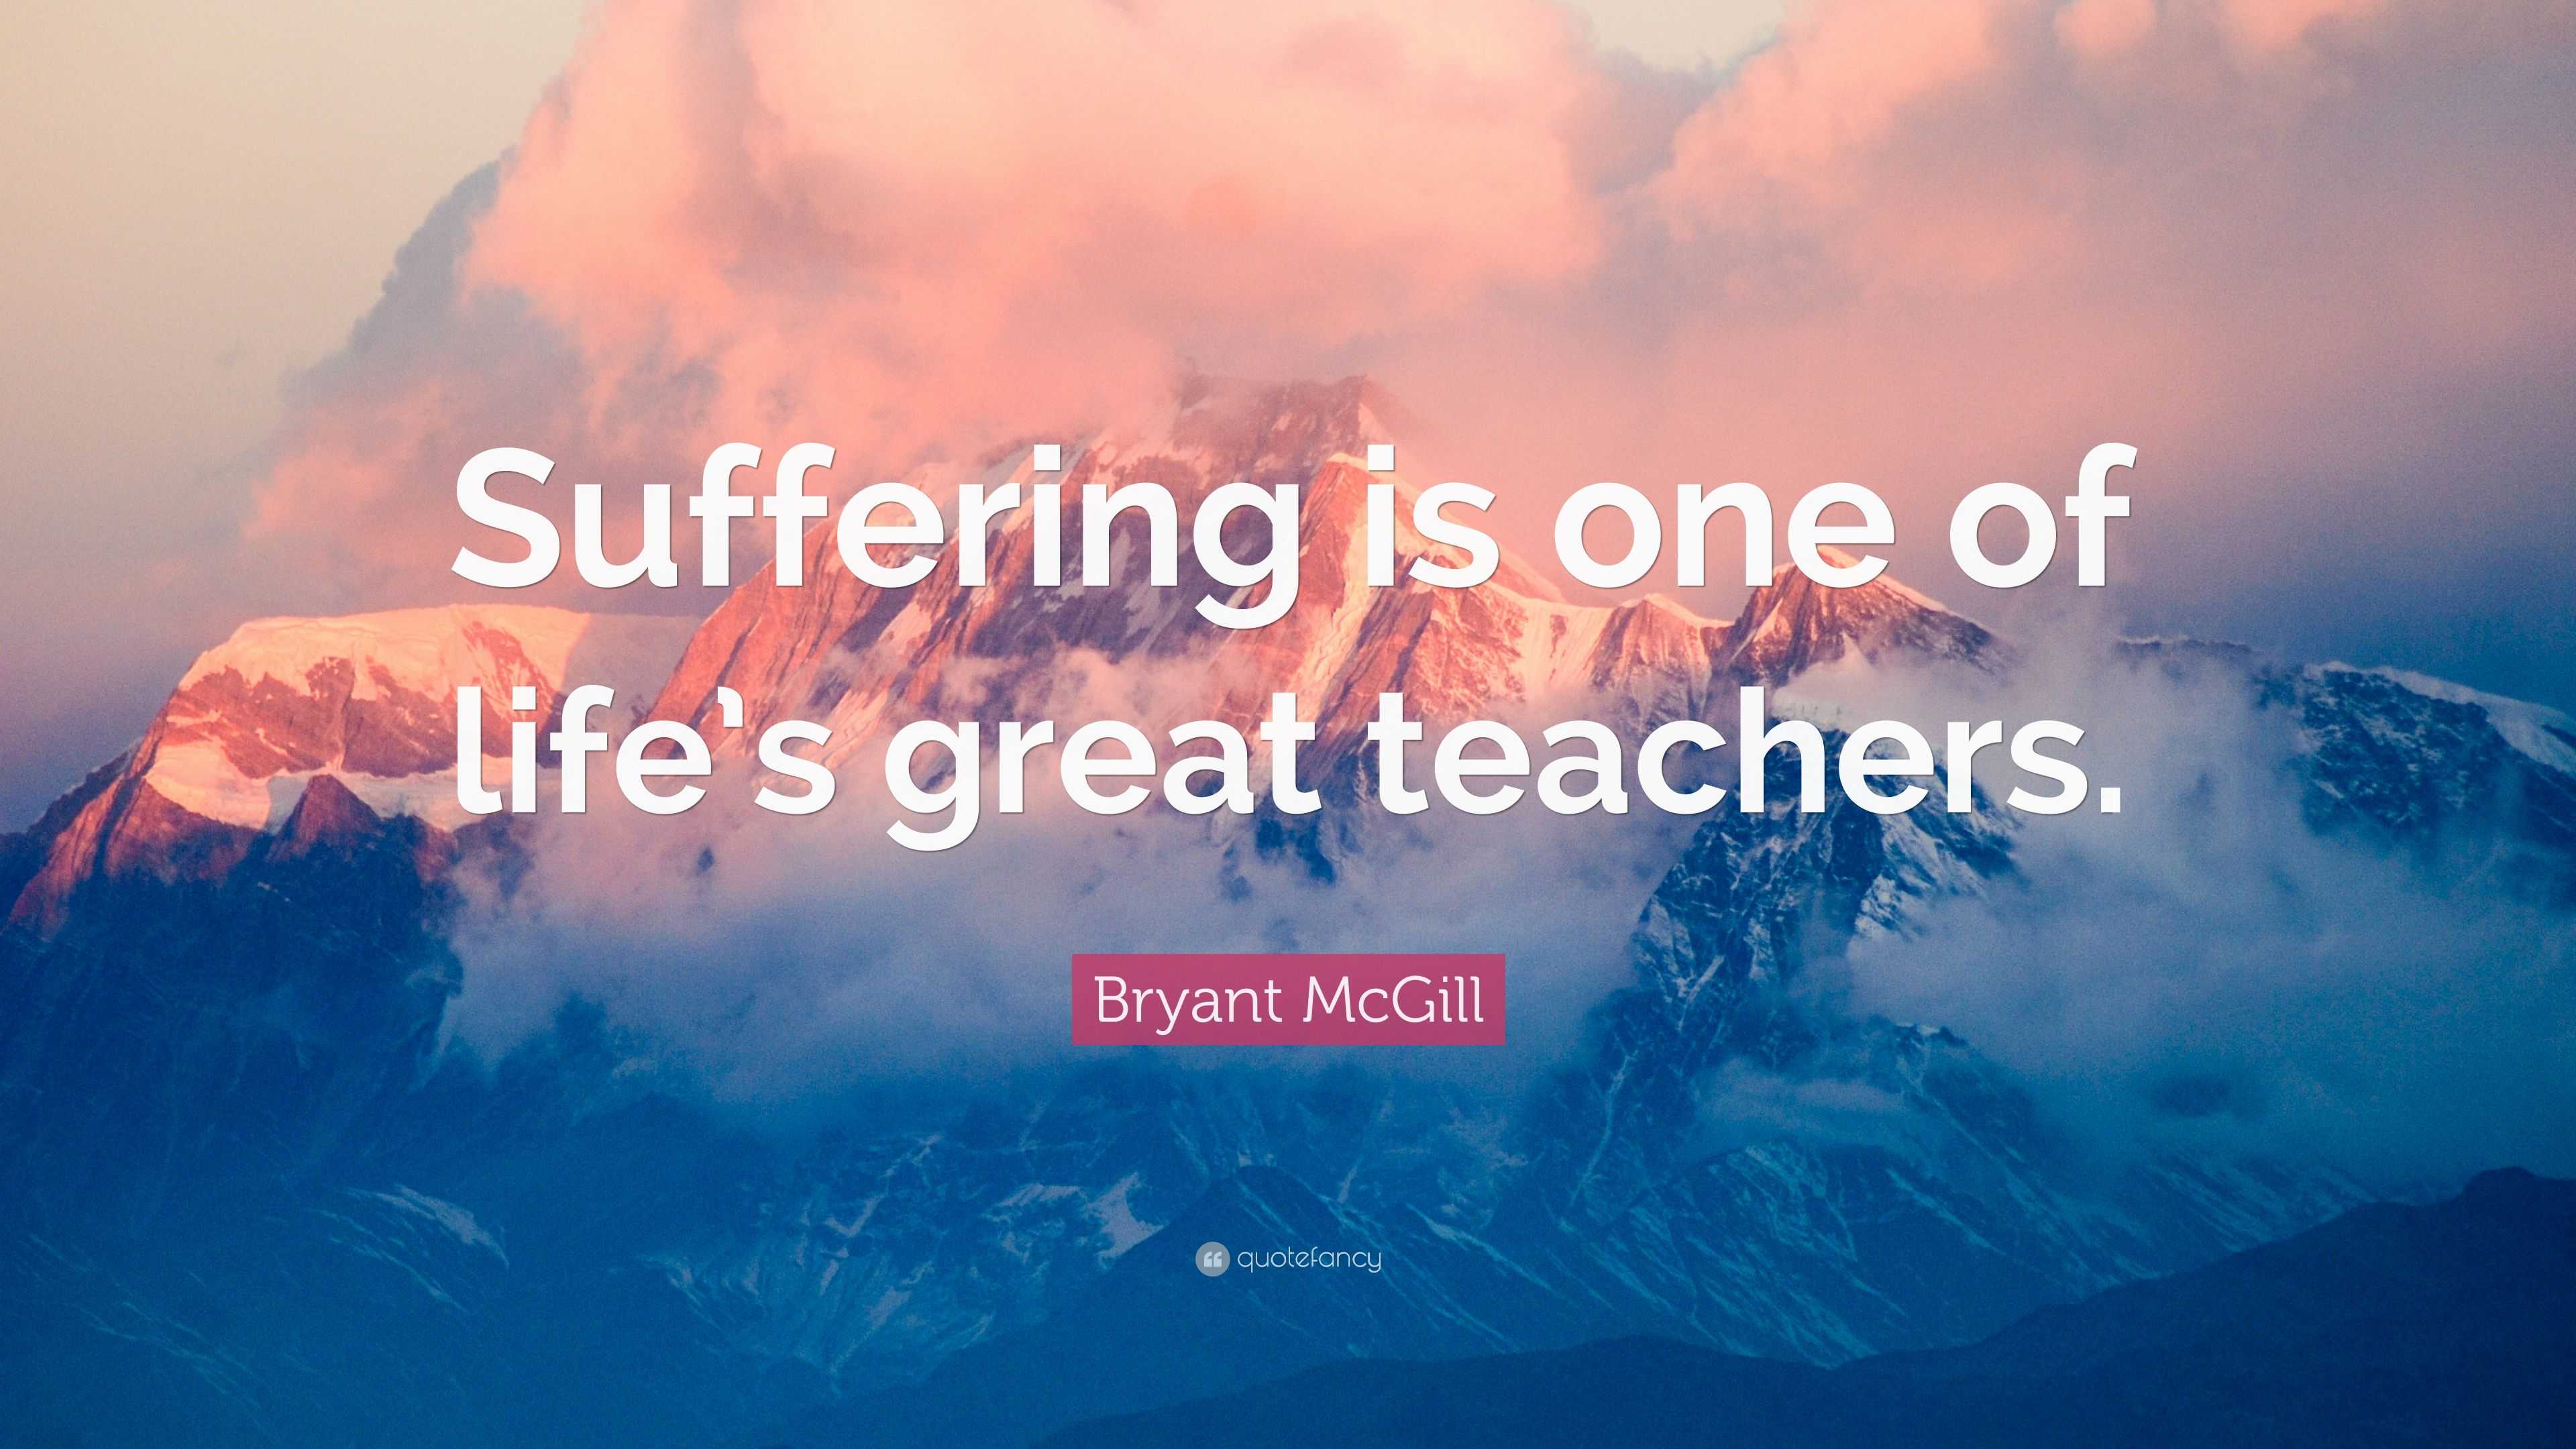 Bryant McGill Quote: “Suffering is one of life’s great teachers.”